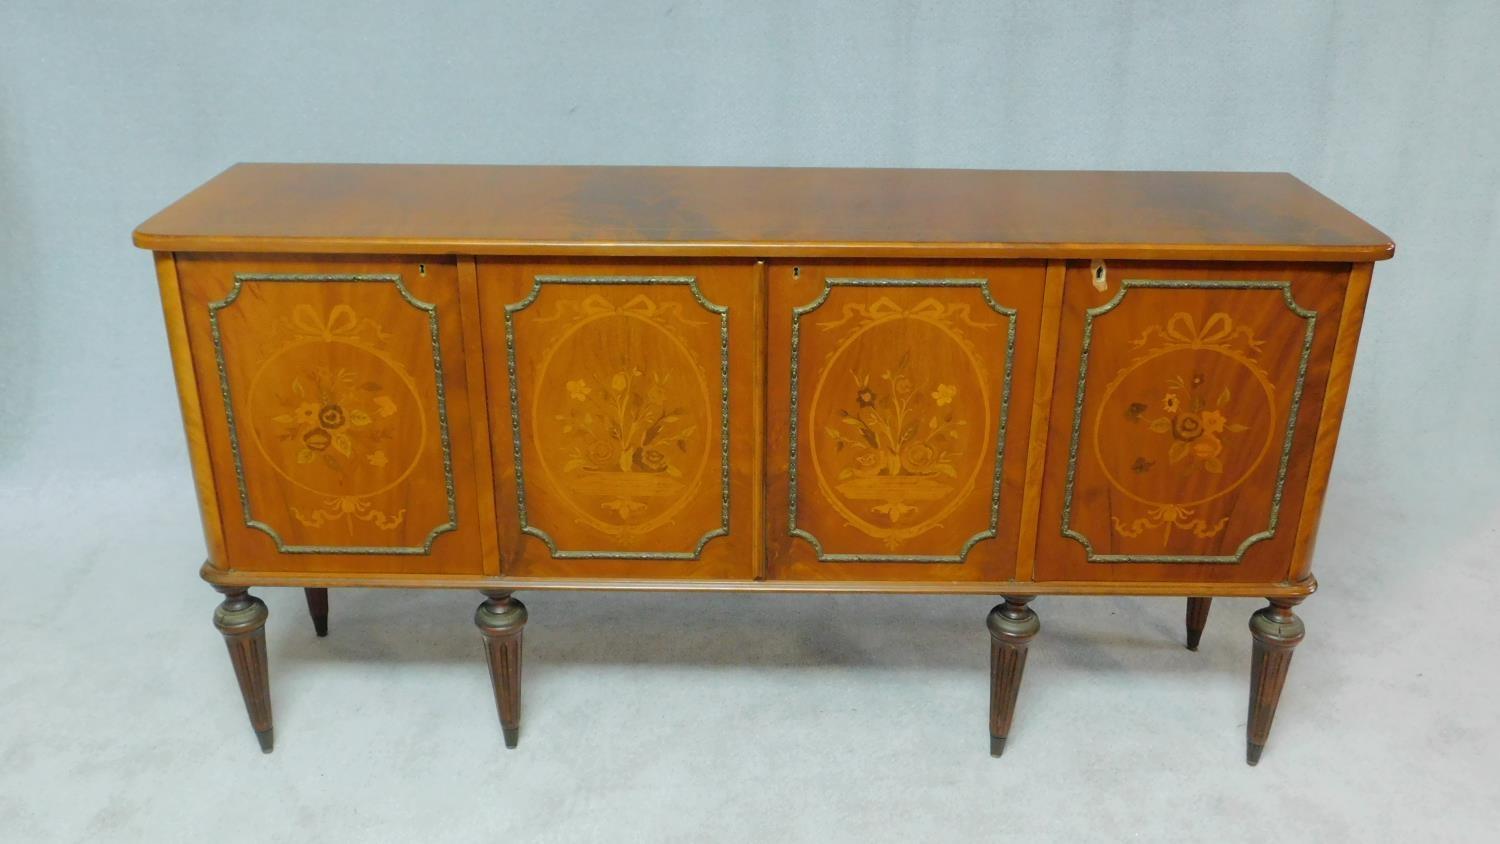 A Continental flame mahogany four door sideboard with floral inlaid panels on fluted tapering